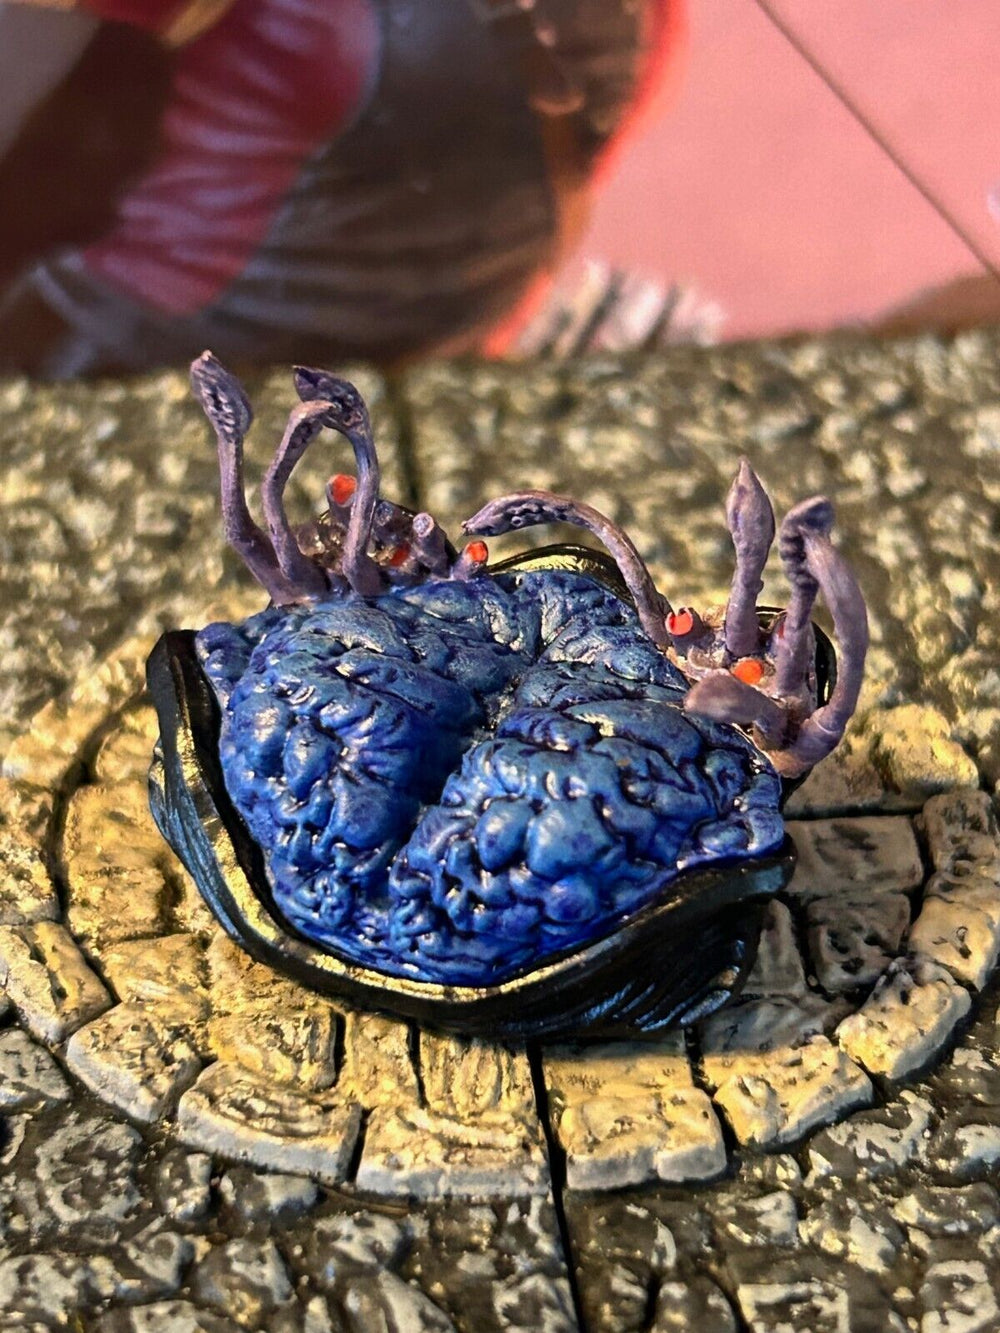 Ship's Helm from Mind Flayer Voyage set D&D Miniature Dungeons Dragons terrain